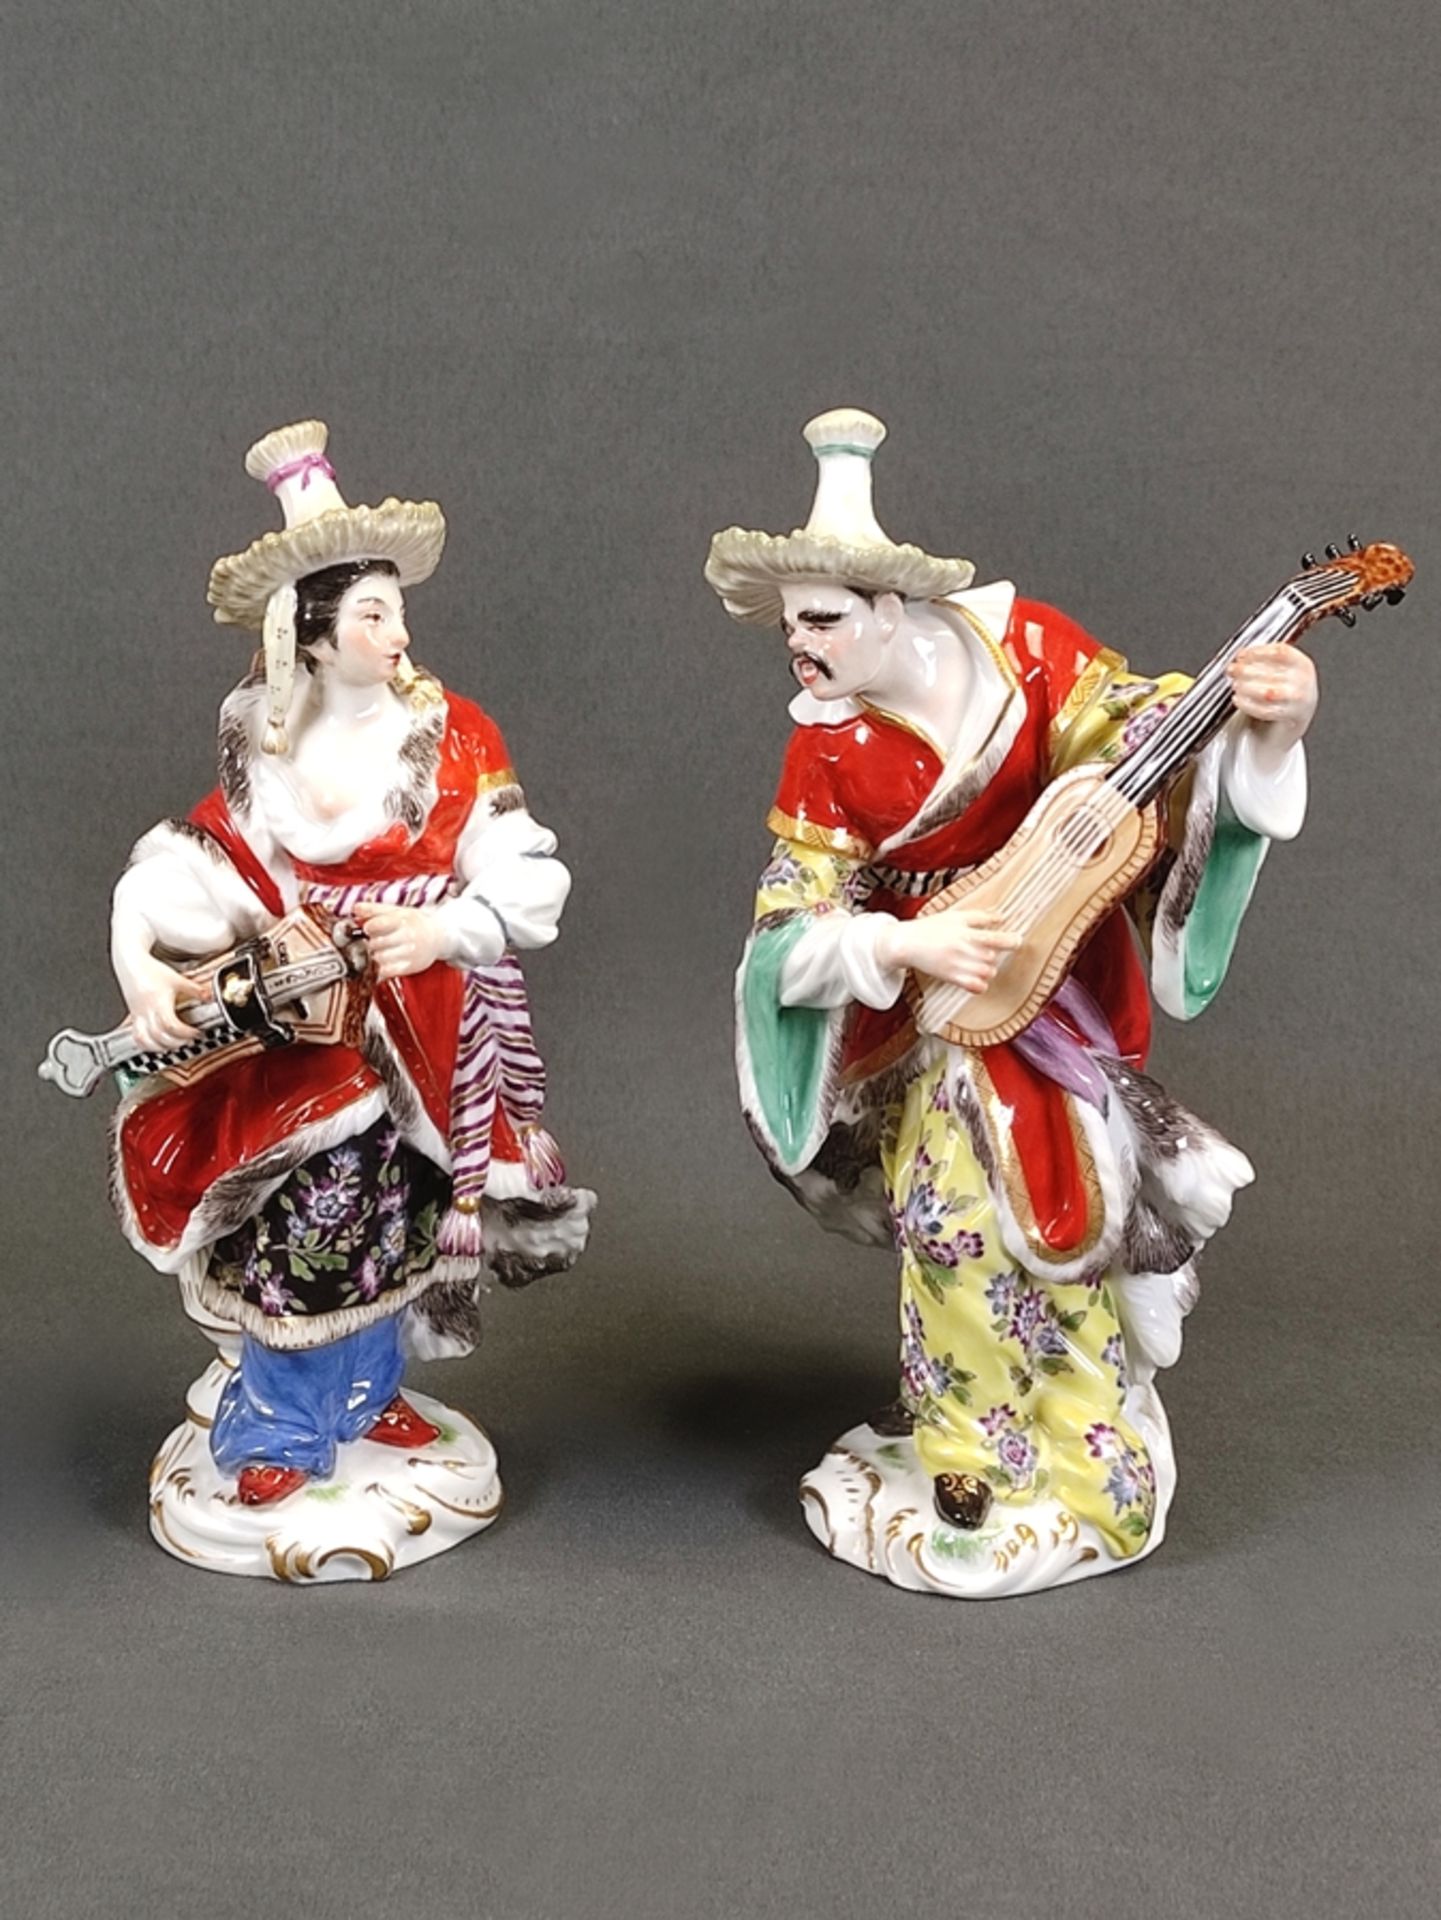 Porcelain pair "Malabarian man with lute" and "Malabarian woman with hurdy-gurdy", Meissen sword ma